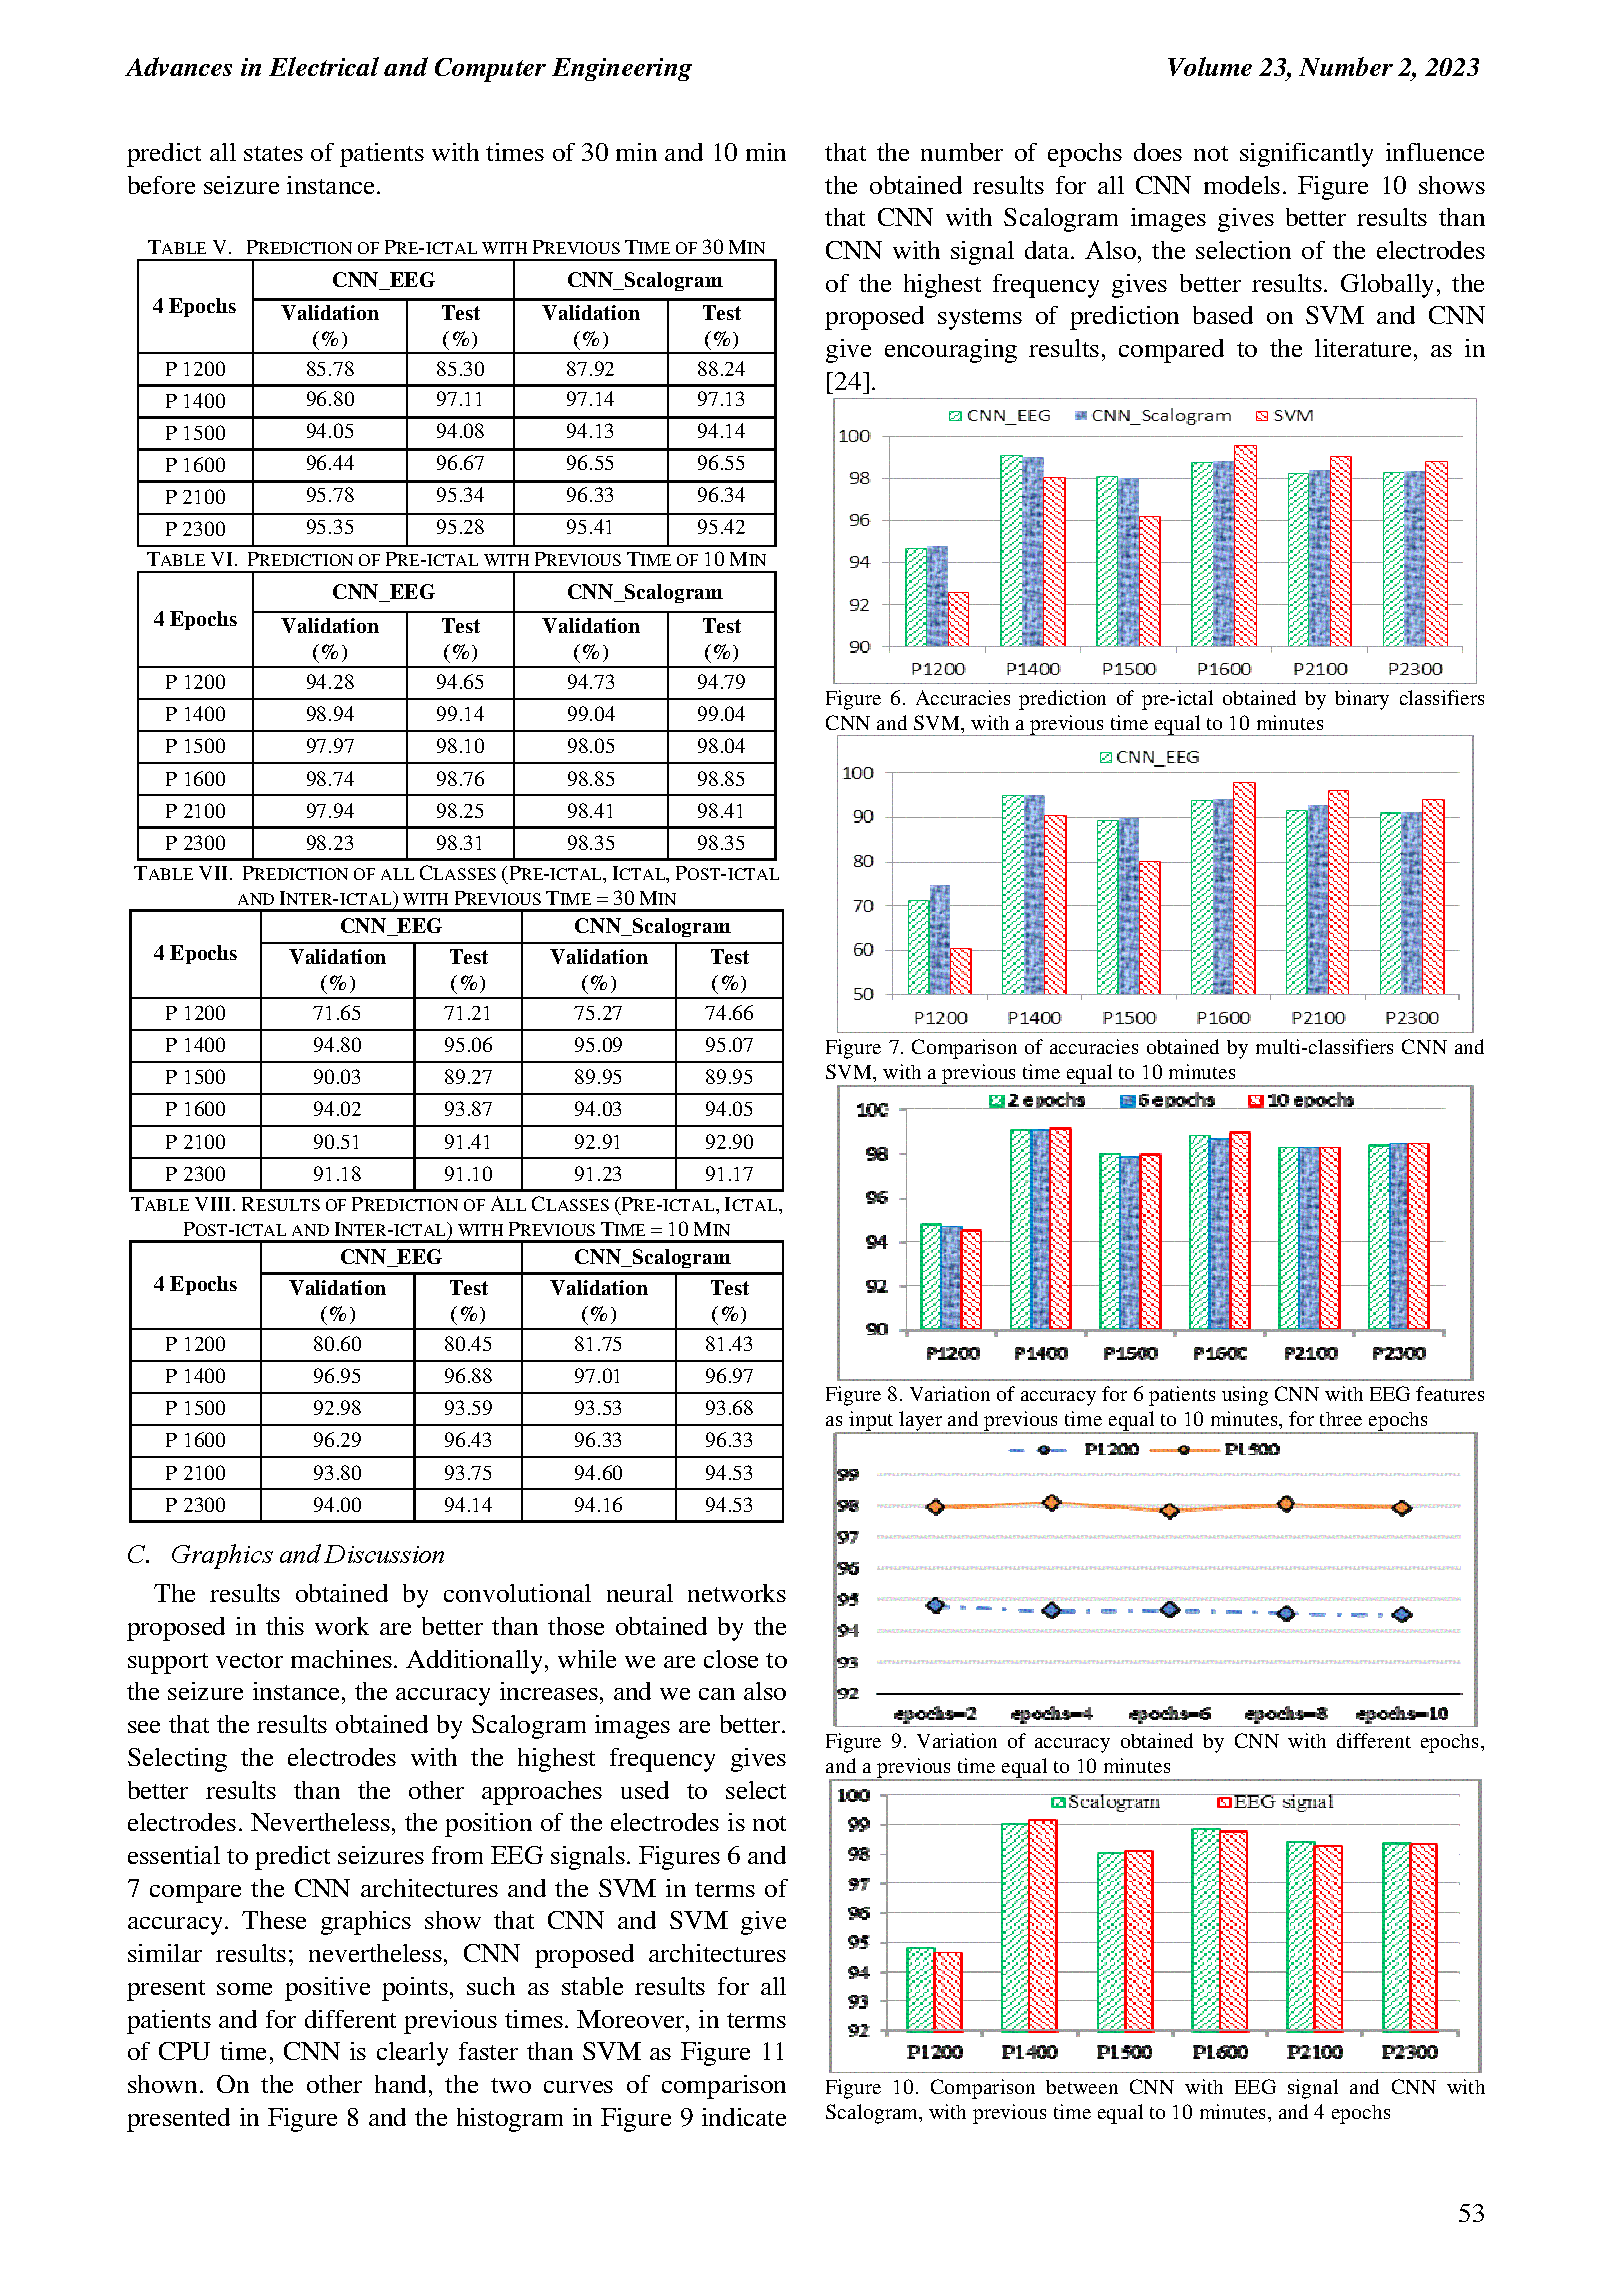 PDF Quickview for paper with DOI:10.4316/AECE.2023.02006